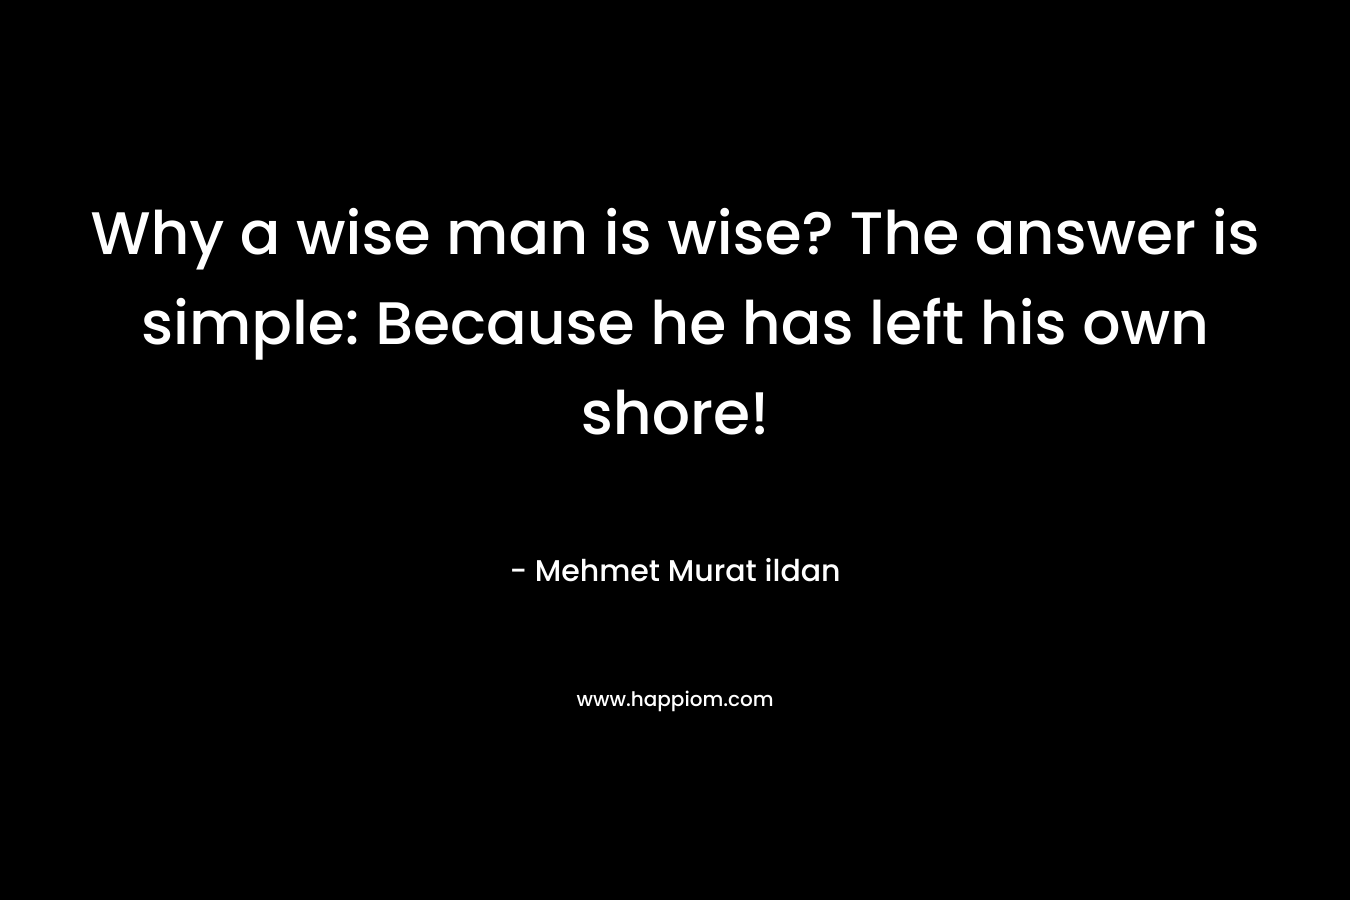 Why a wise man is wise? The answer is simple: Because he has left his own shore!